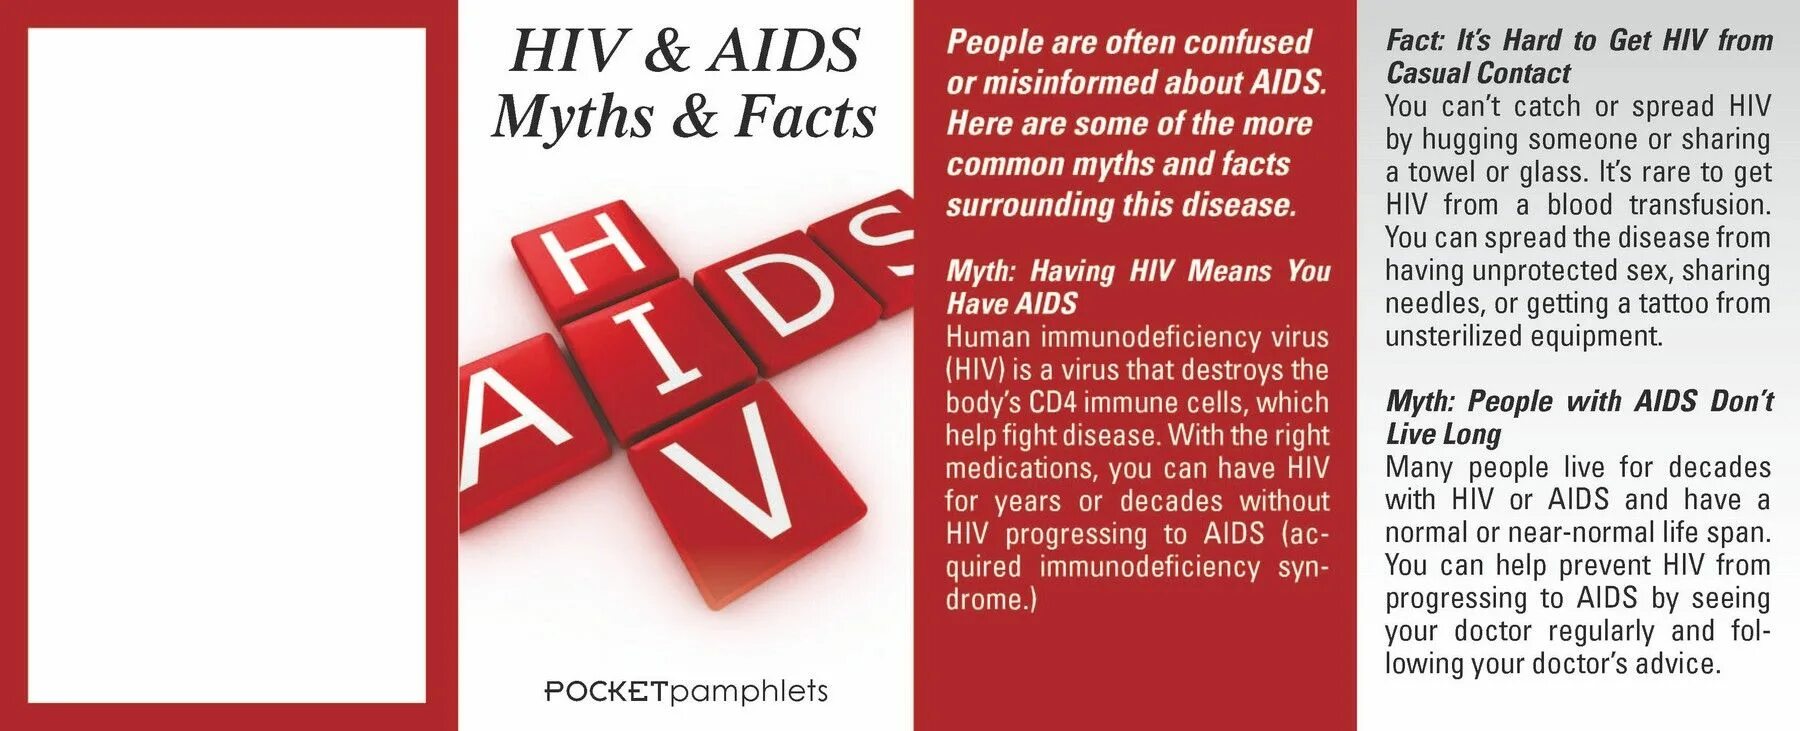 About AIDS. HIV AIDS. Myths about HIV and AIDS. Pamphlet for HIV.